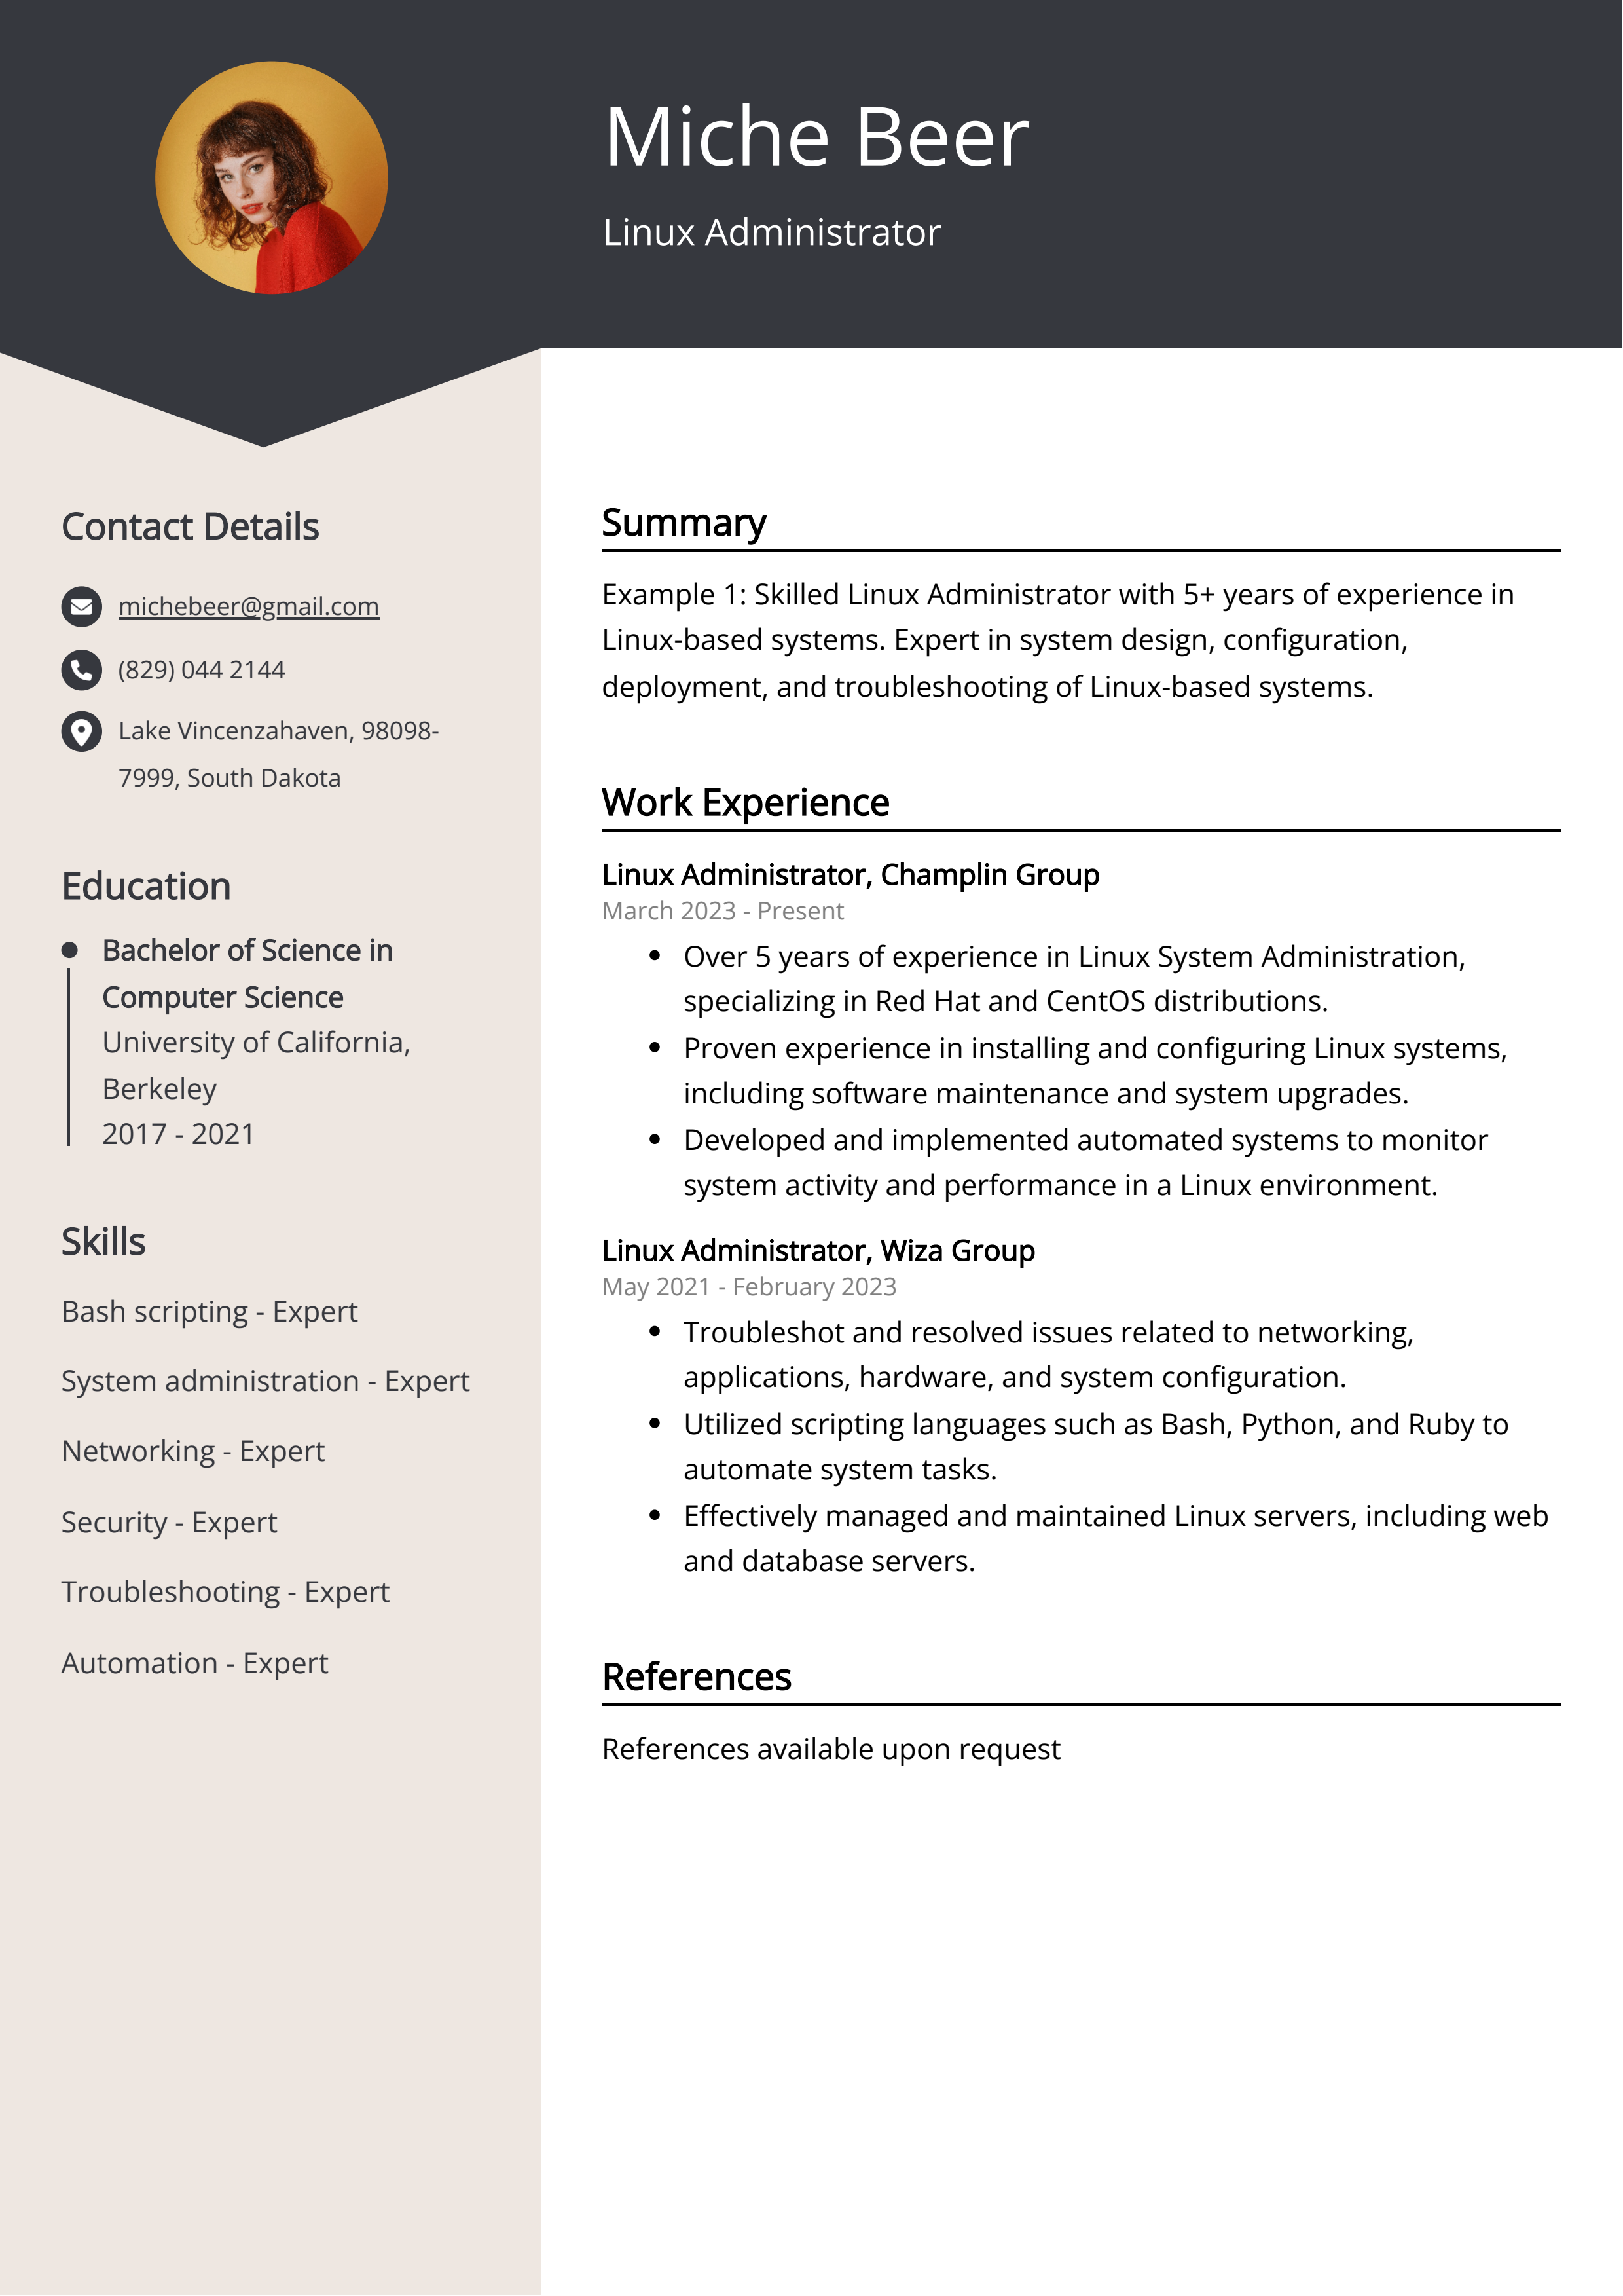 Linux Administrator CV Example